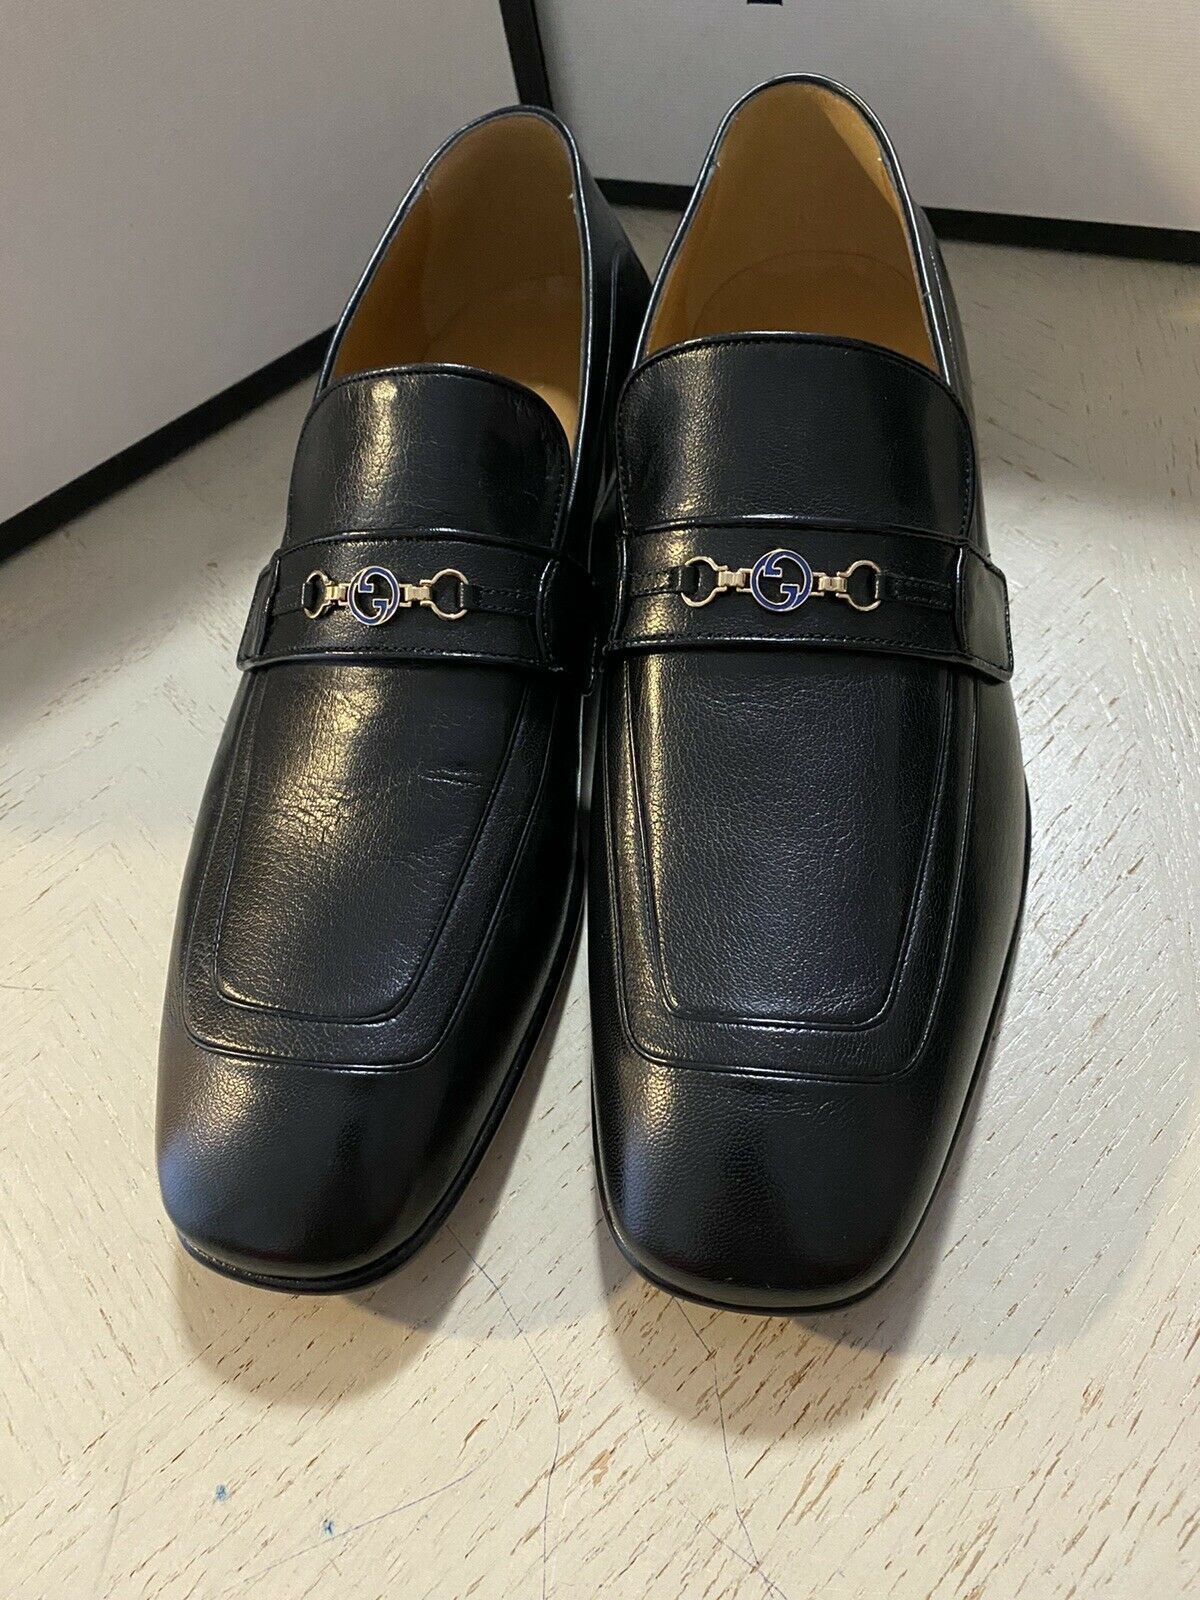 New Gucci Men’s GG Monogram Leather Loafers Shoes Black 9 US ( 8 UK ) Italy